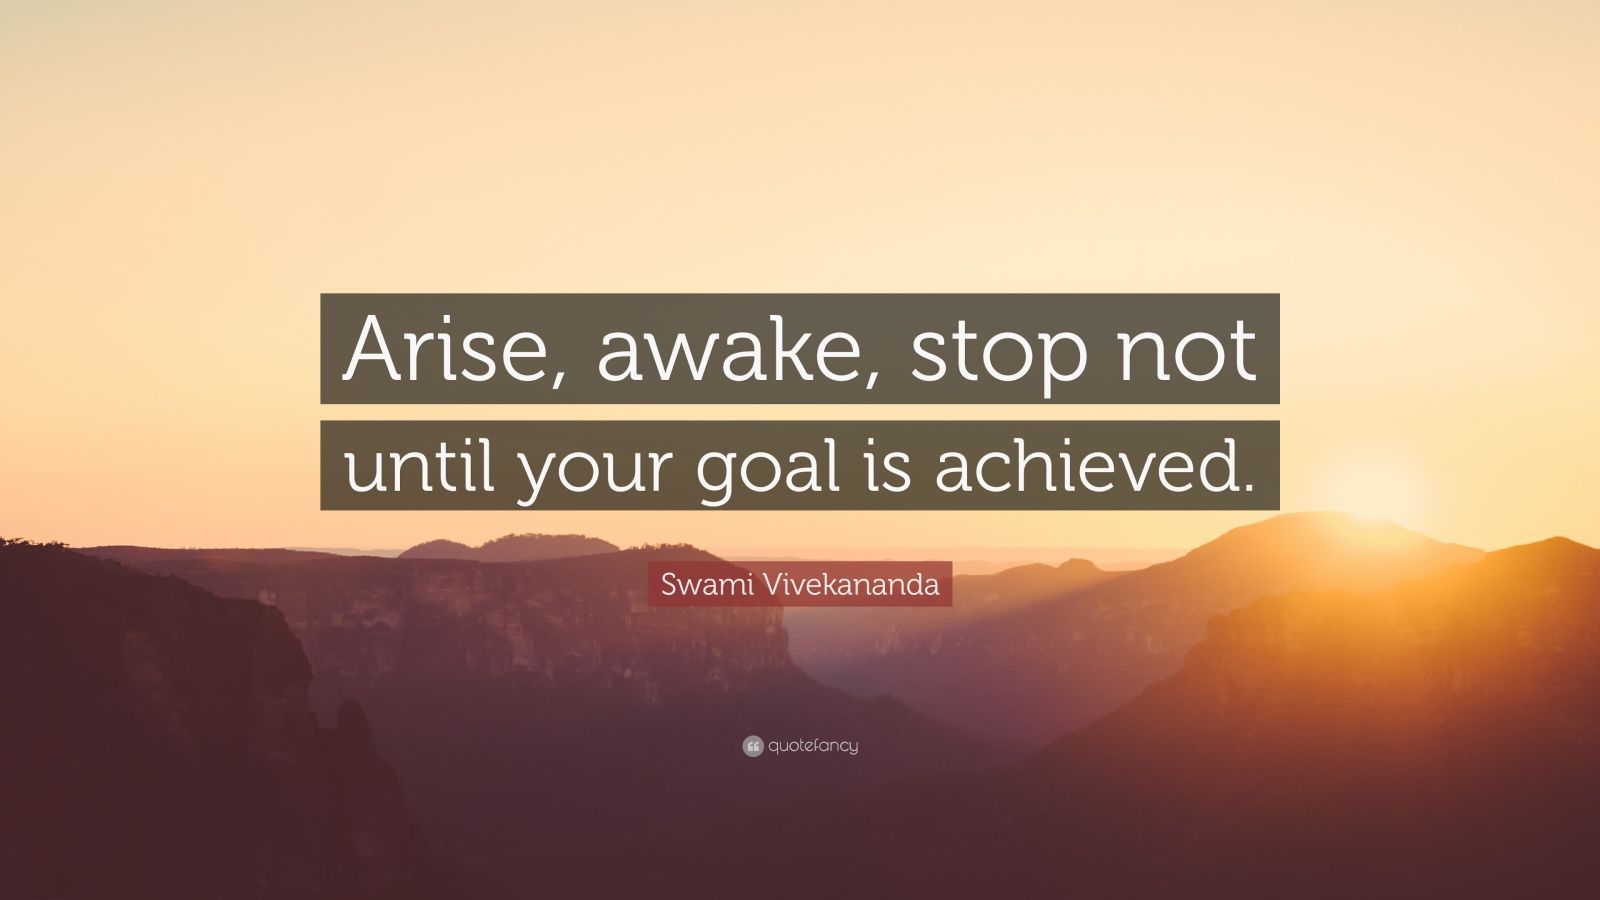 Swami Vivekananda Quote: “Arise, awake, stop not until your goal is achieved.” (15 wallpaper)